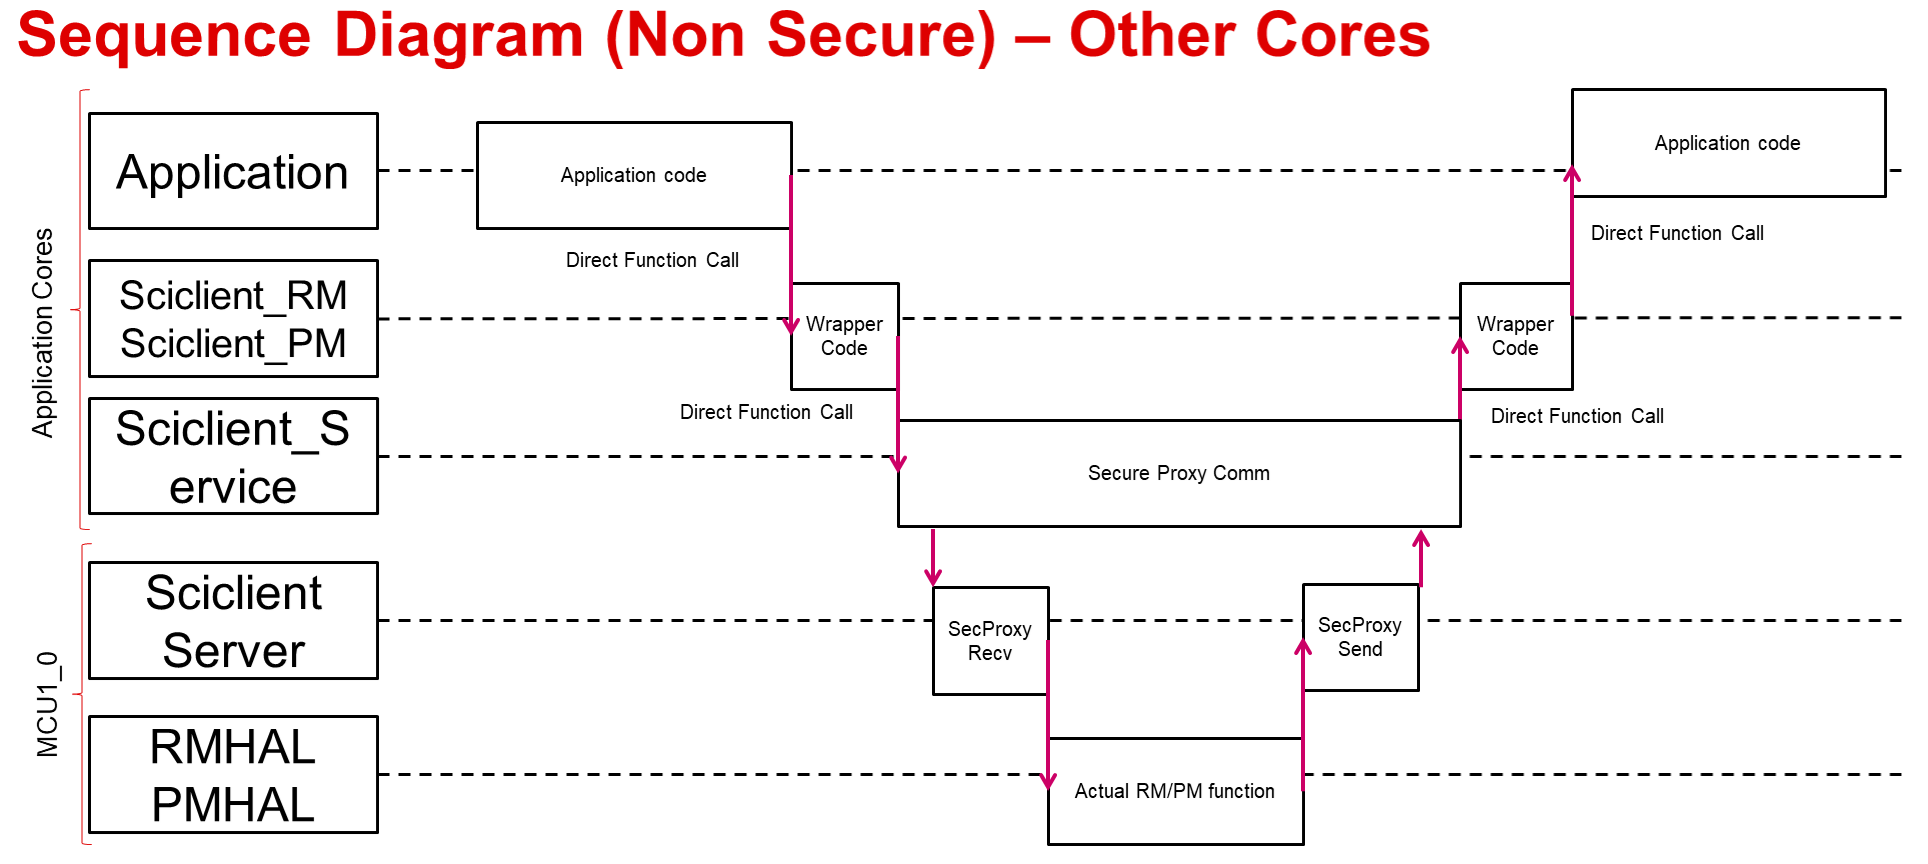 ../../_images/SeqDiagram_NonSecure_other.png